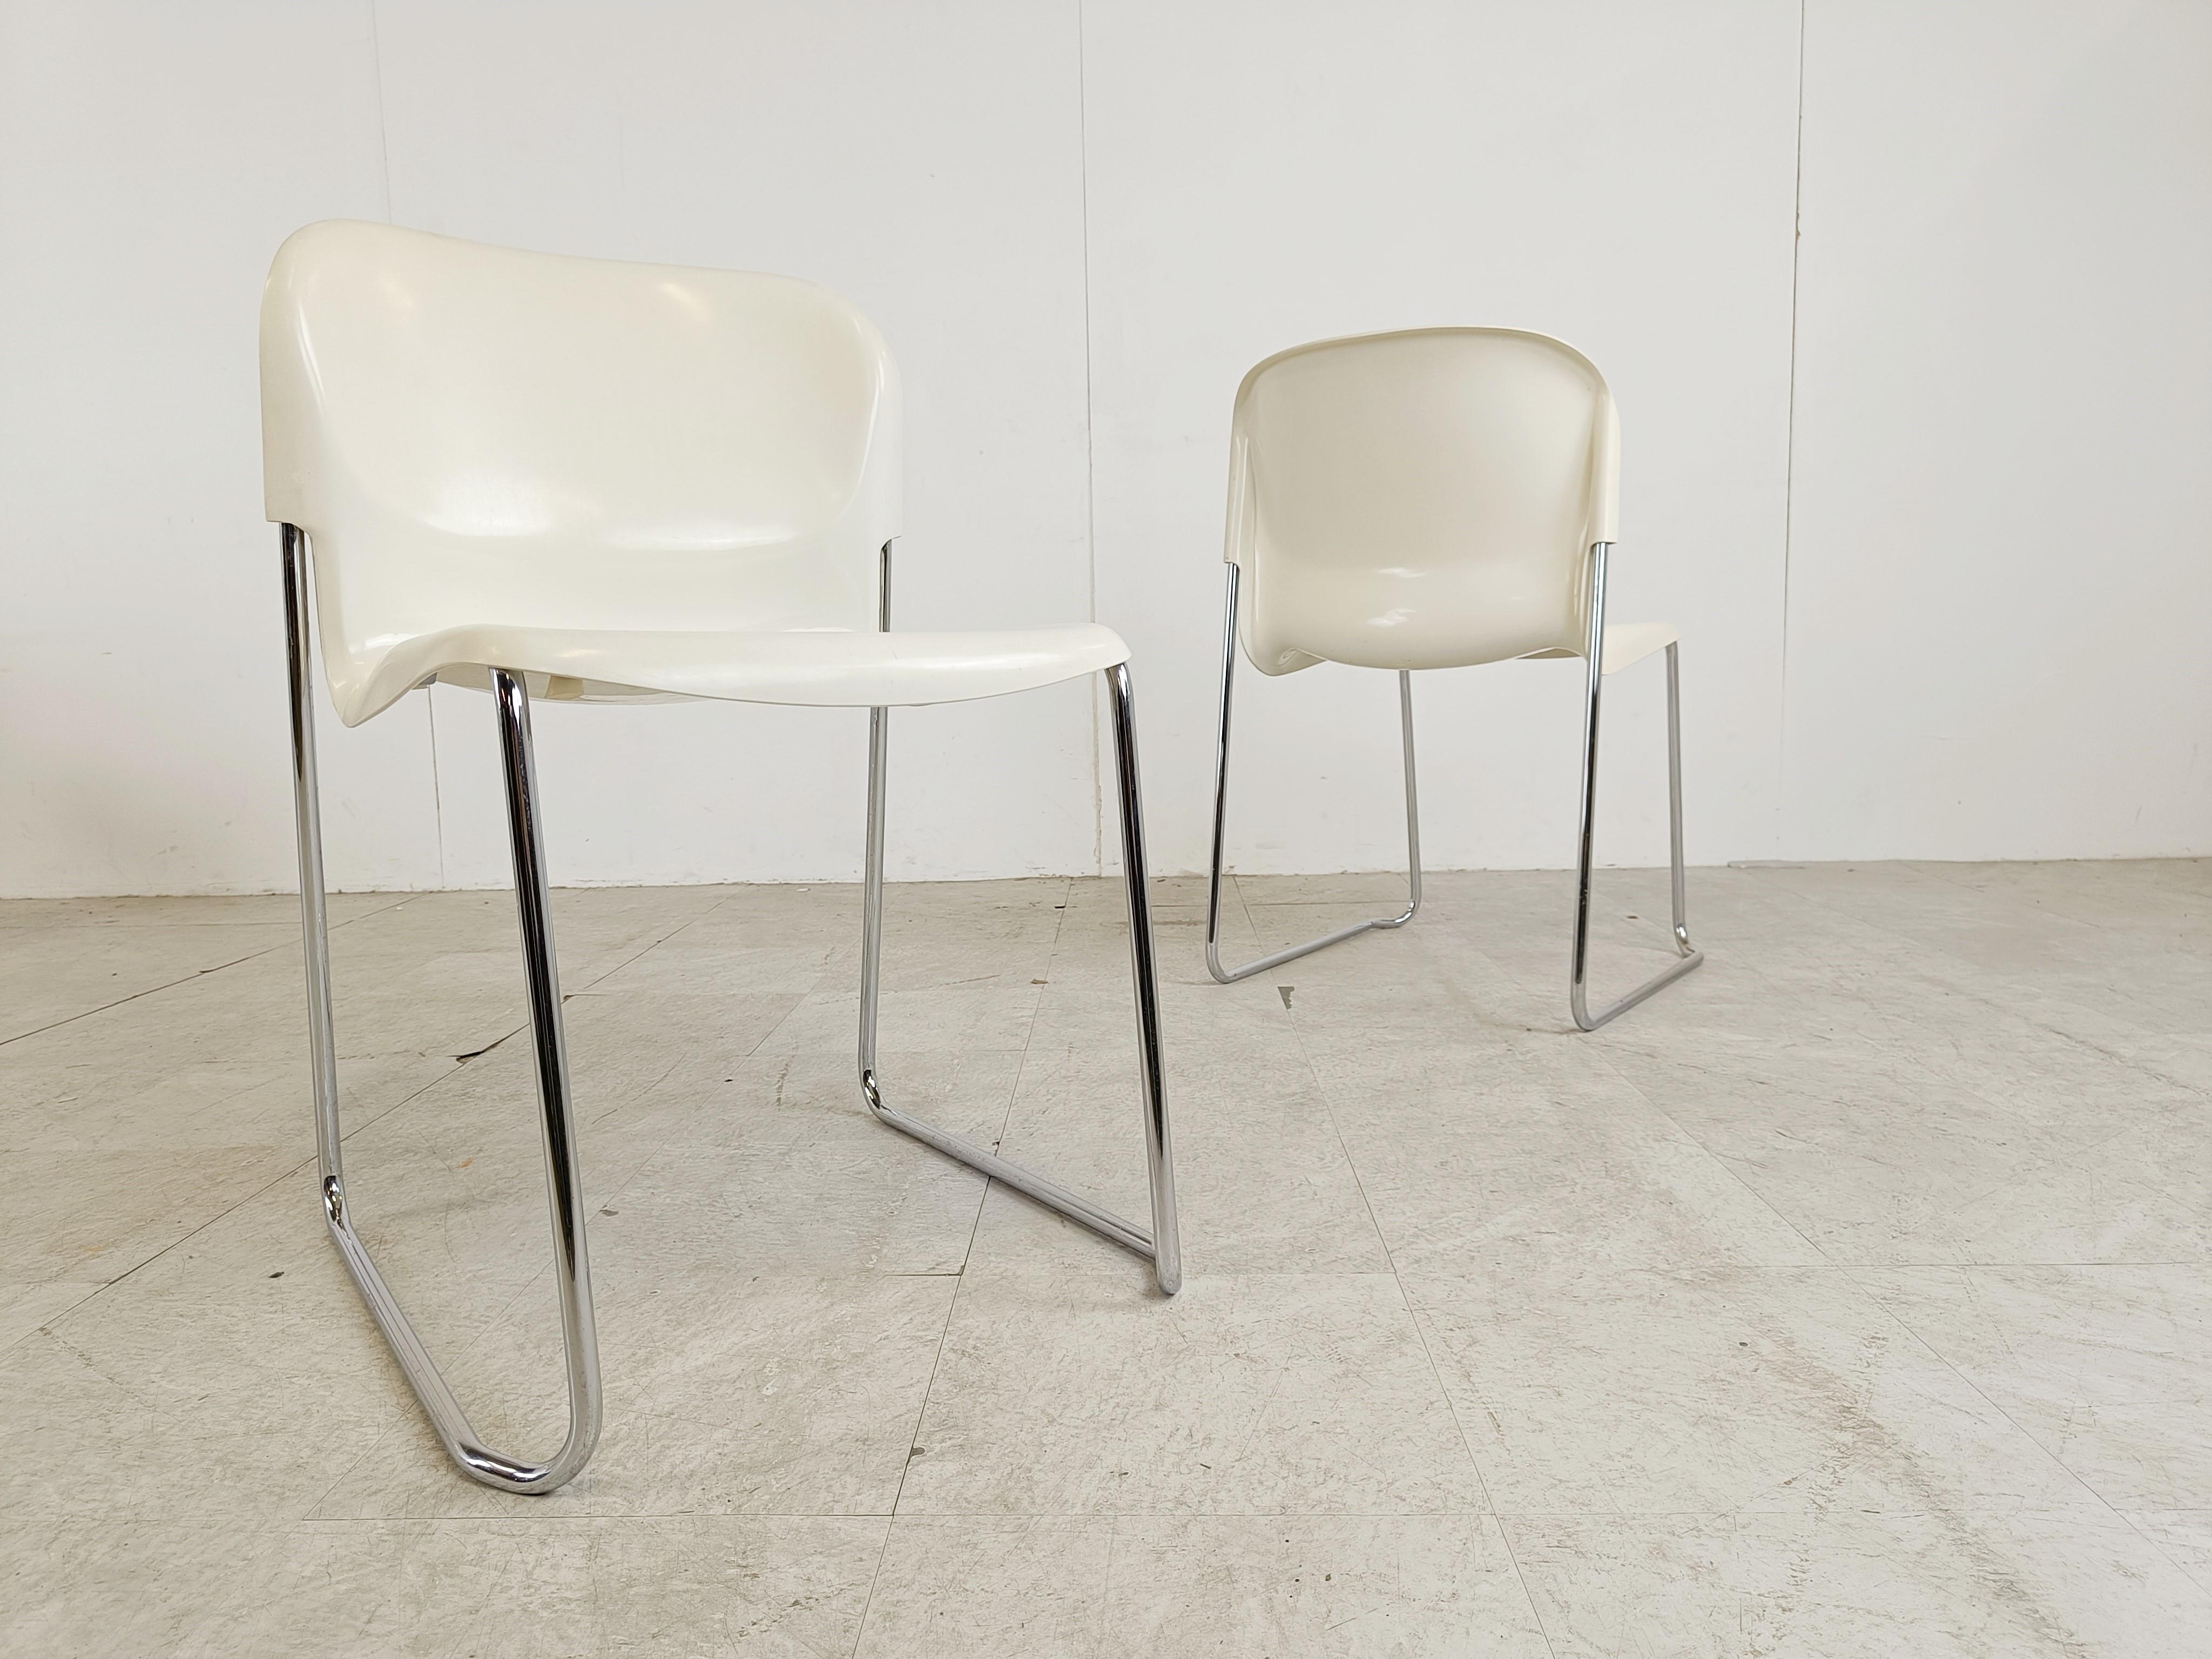 Vintage Drabert SM400 stacking chairs by Gerd Lange, 1980s For Sale 1